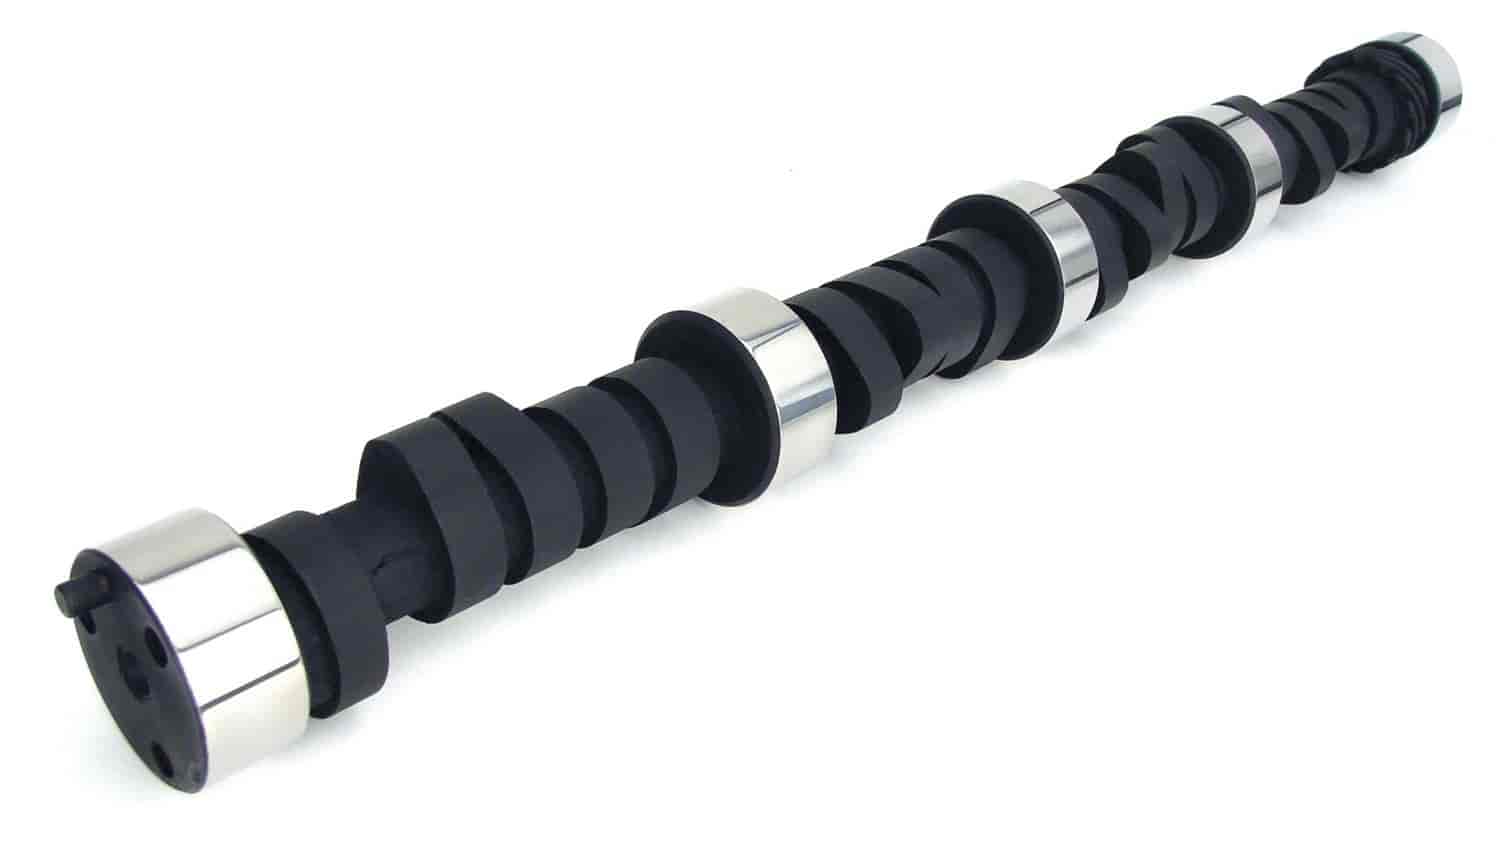 Xtreme Energy 262H Hydraulic Flat Tappet Camshaft Only Lift: .462" /.469" Duration: 262°/270° RPM Range: 1300-5600